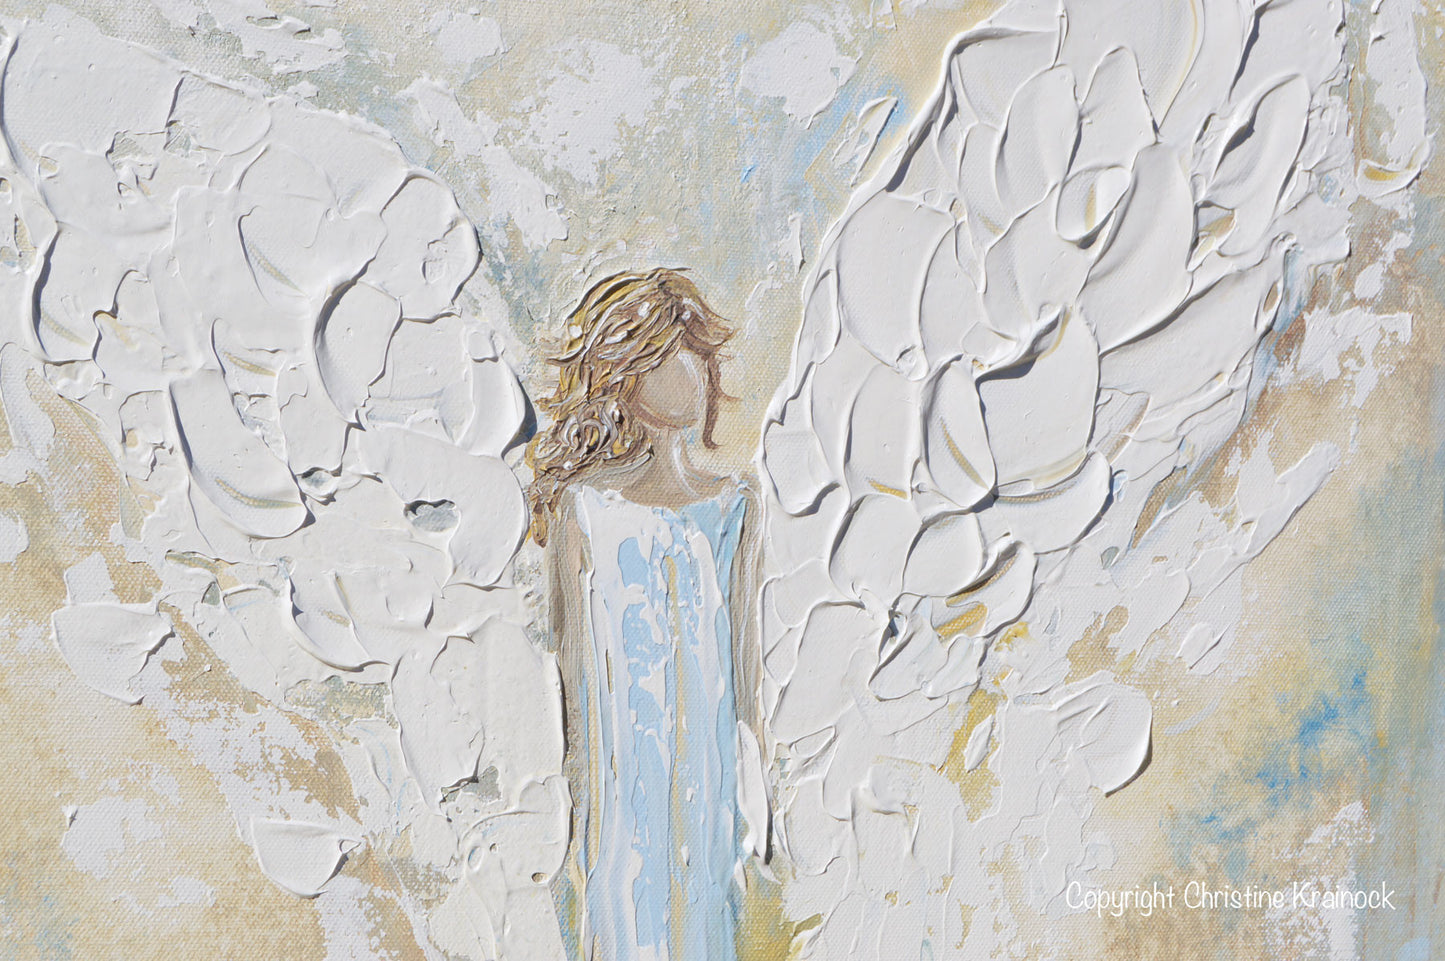 Load image into Gallery viewer, GICLEE PRINT Angel Painting Abstract Guardian Angel Wings Blue Gold White Modern Home Wall Art - Christine Krainock Art - Contemporary Art by Christine - 5
